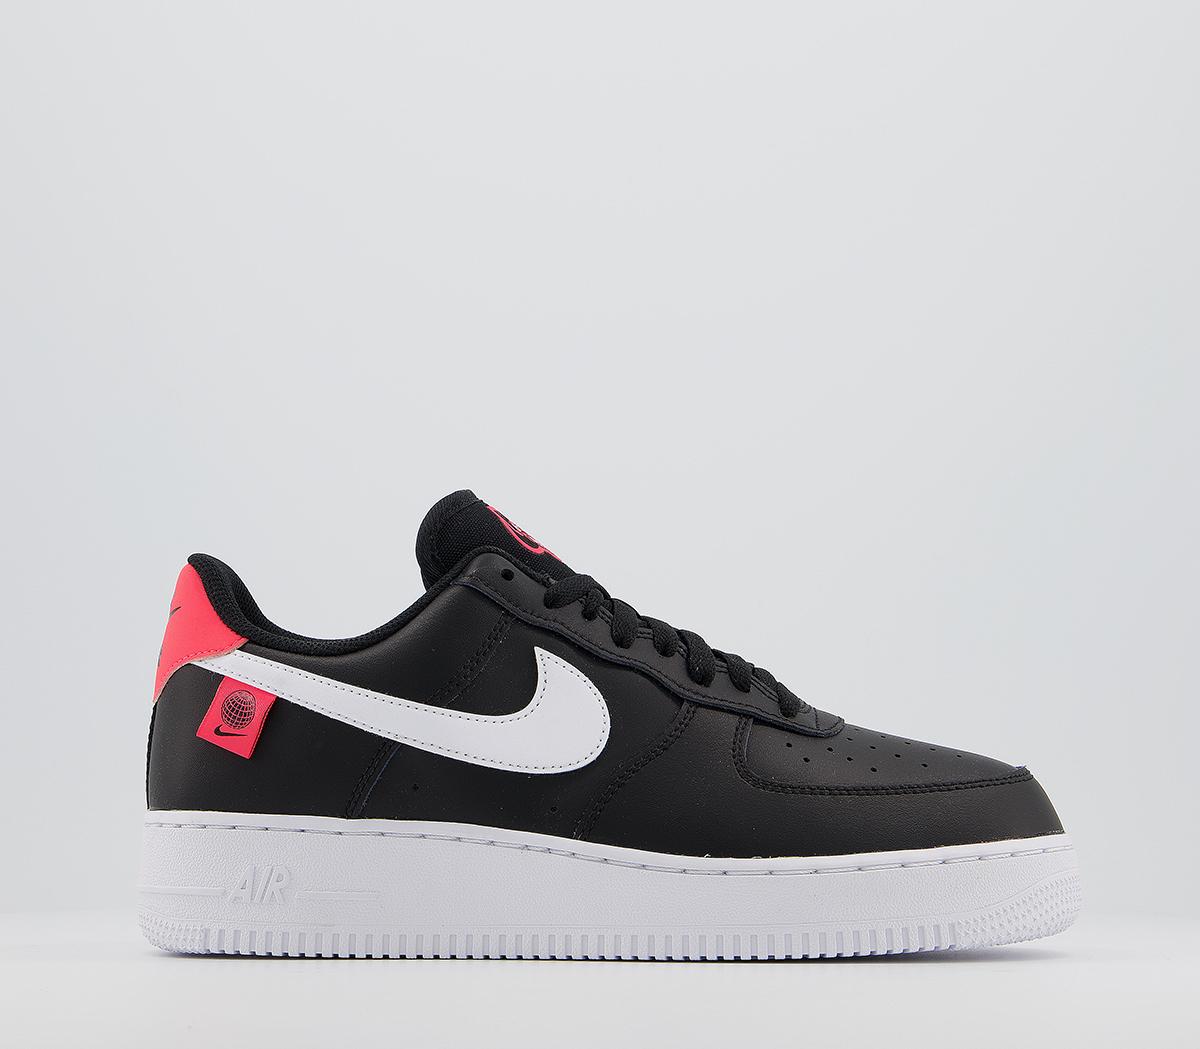 air force 1 07 trainers white black white